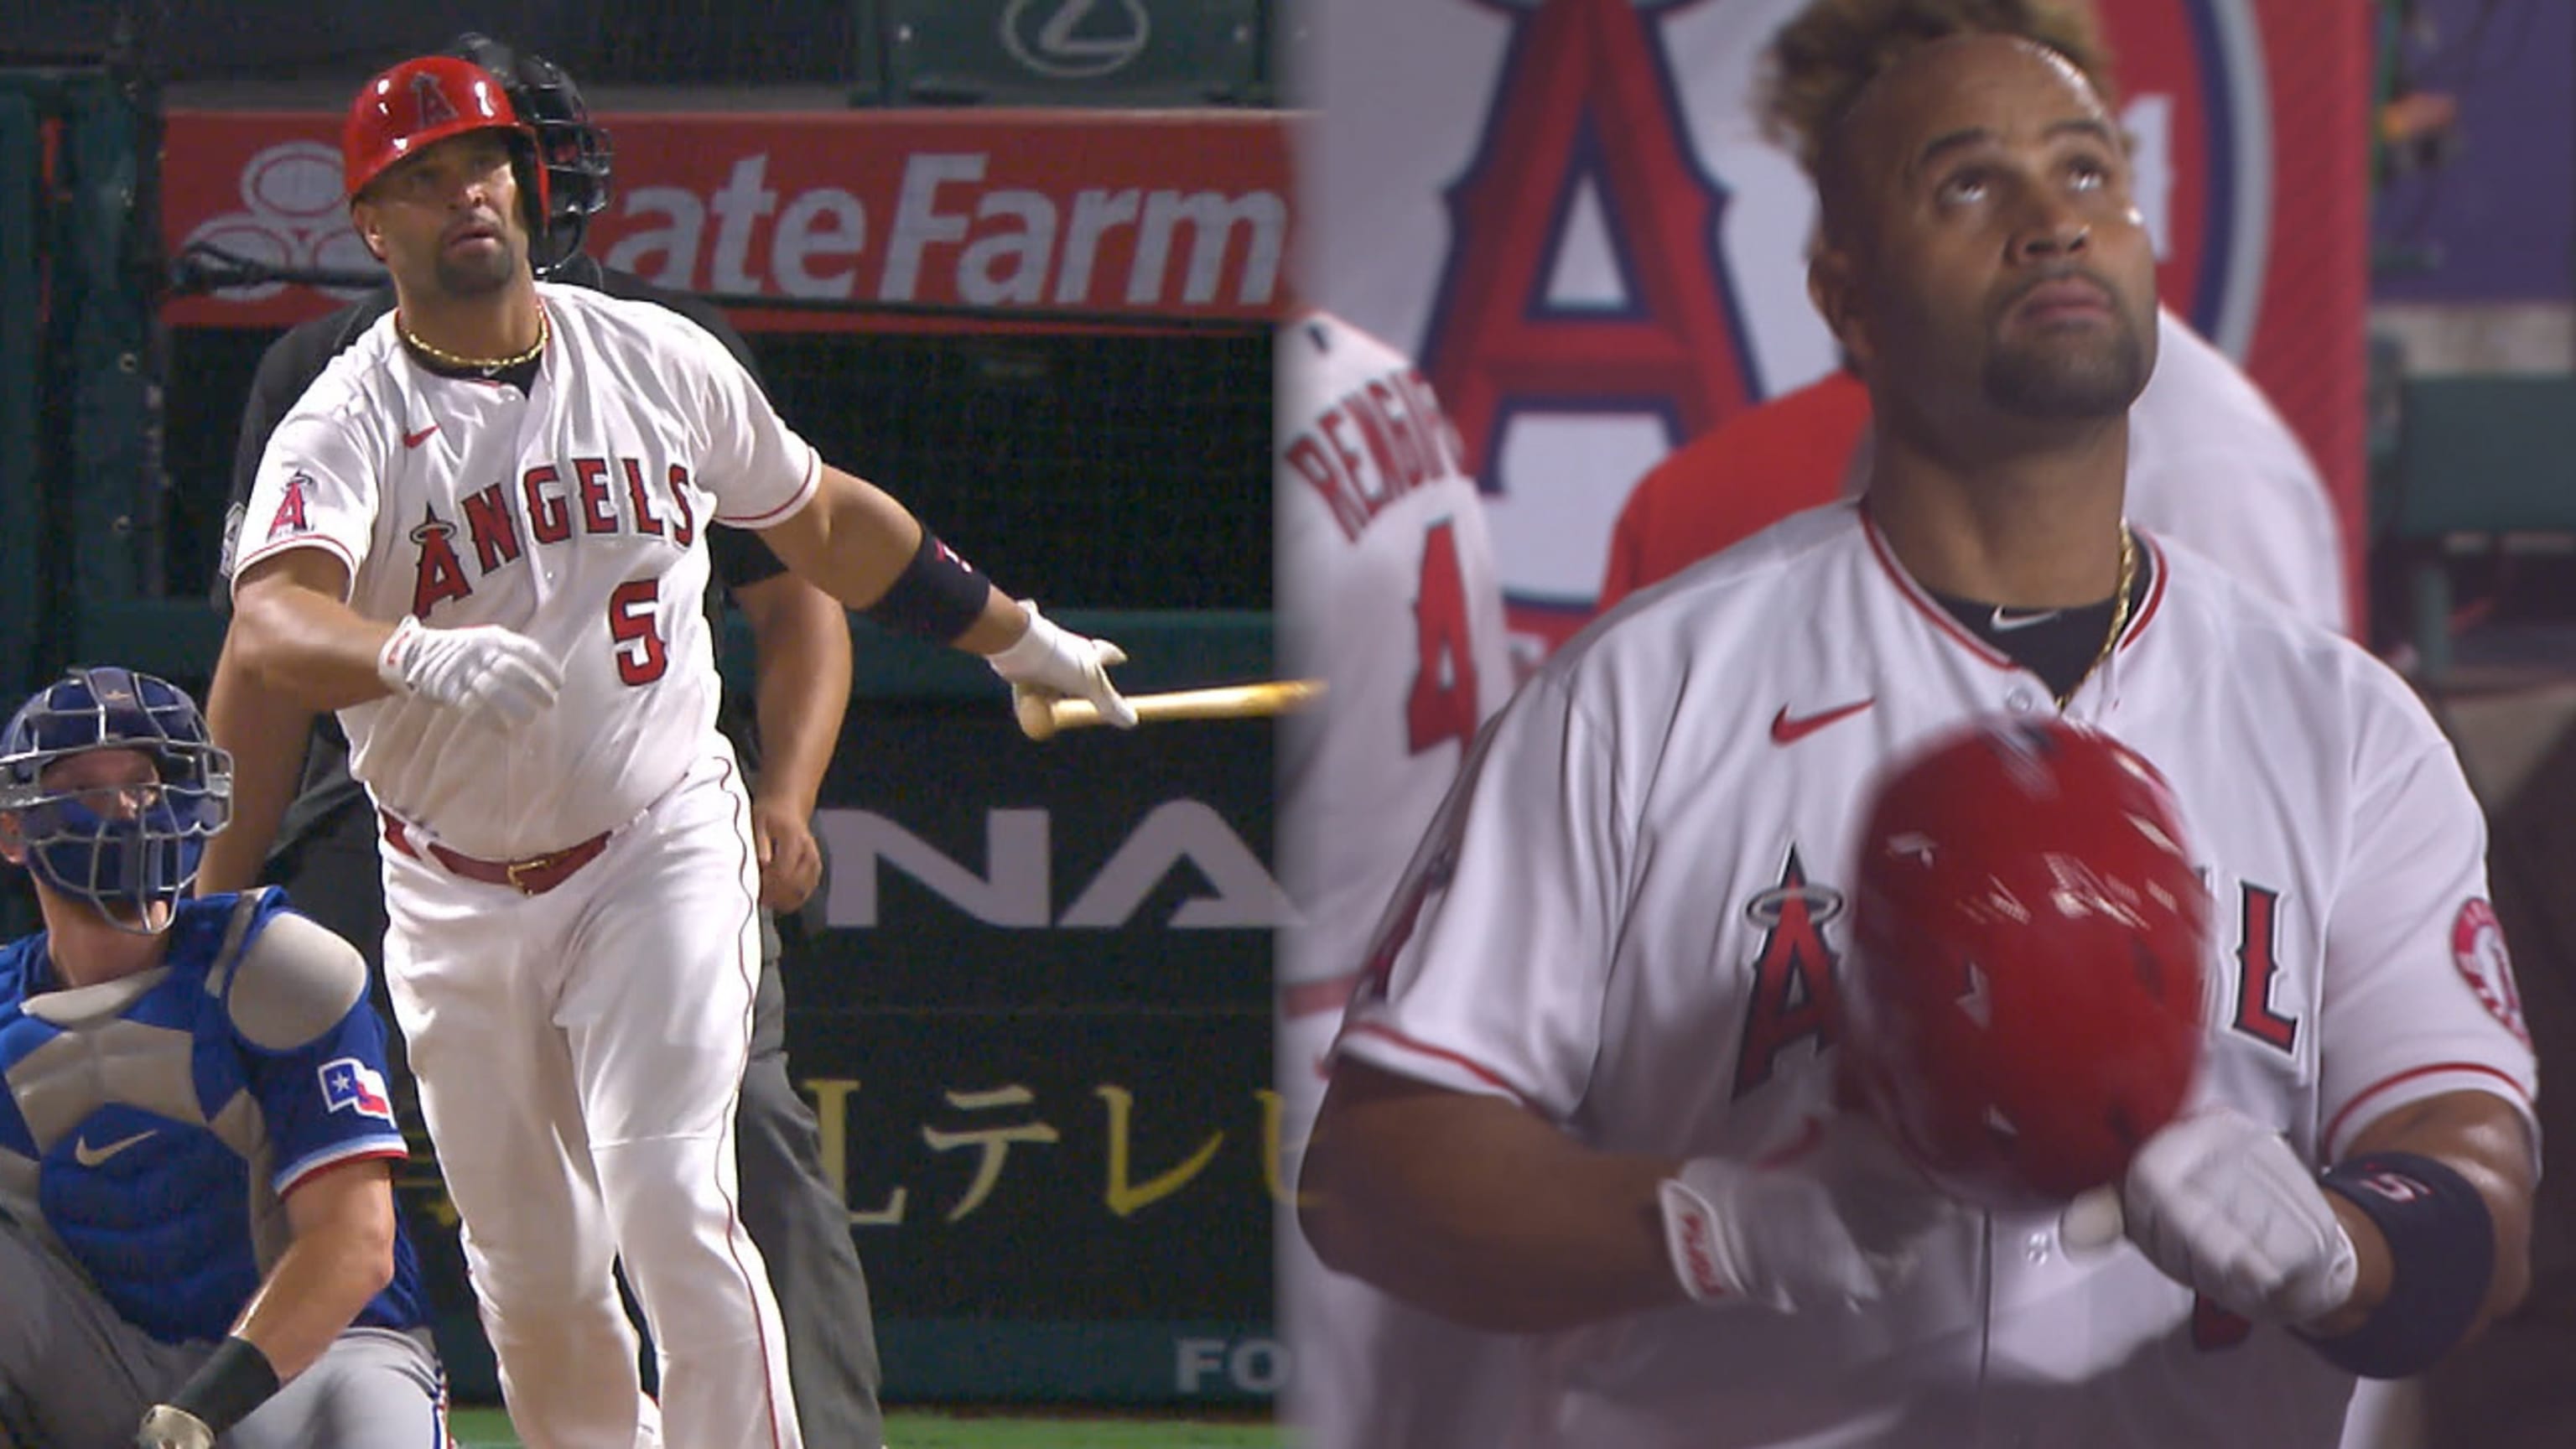 Albert Pujols hits 661 career home run to pass Willie Mays for 5th